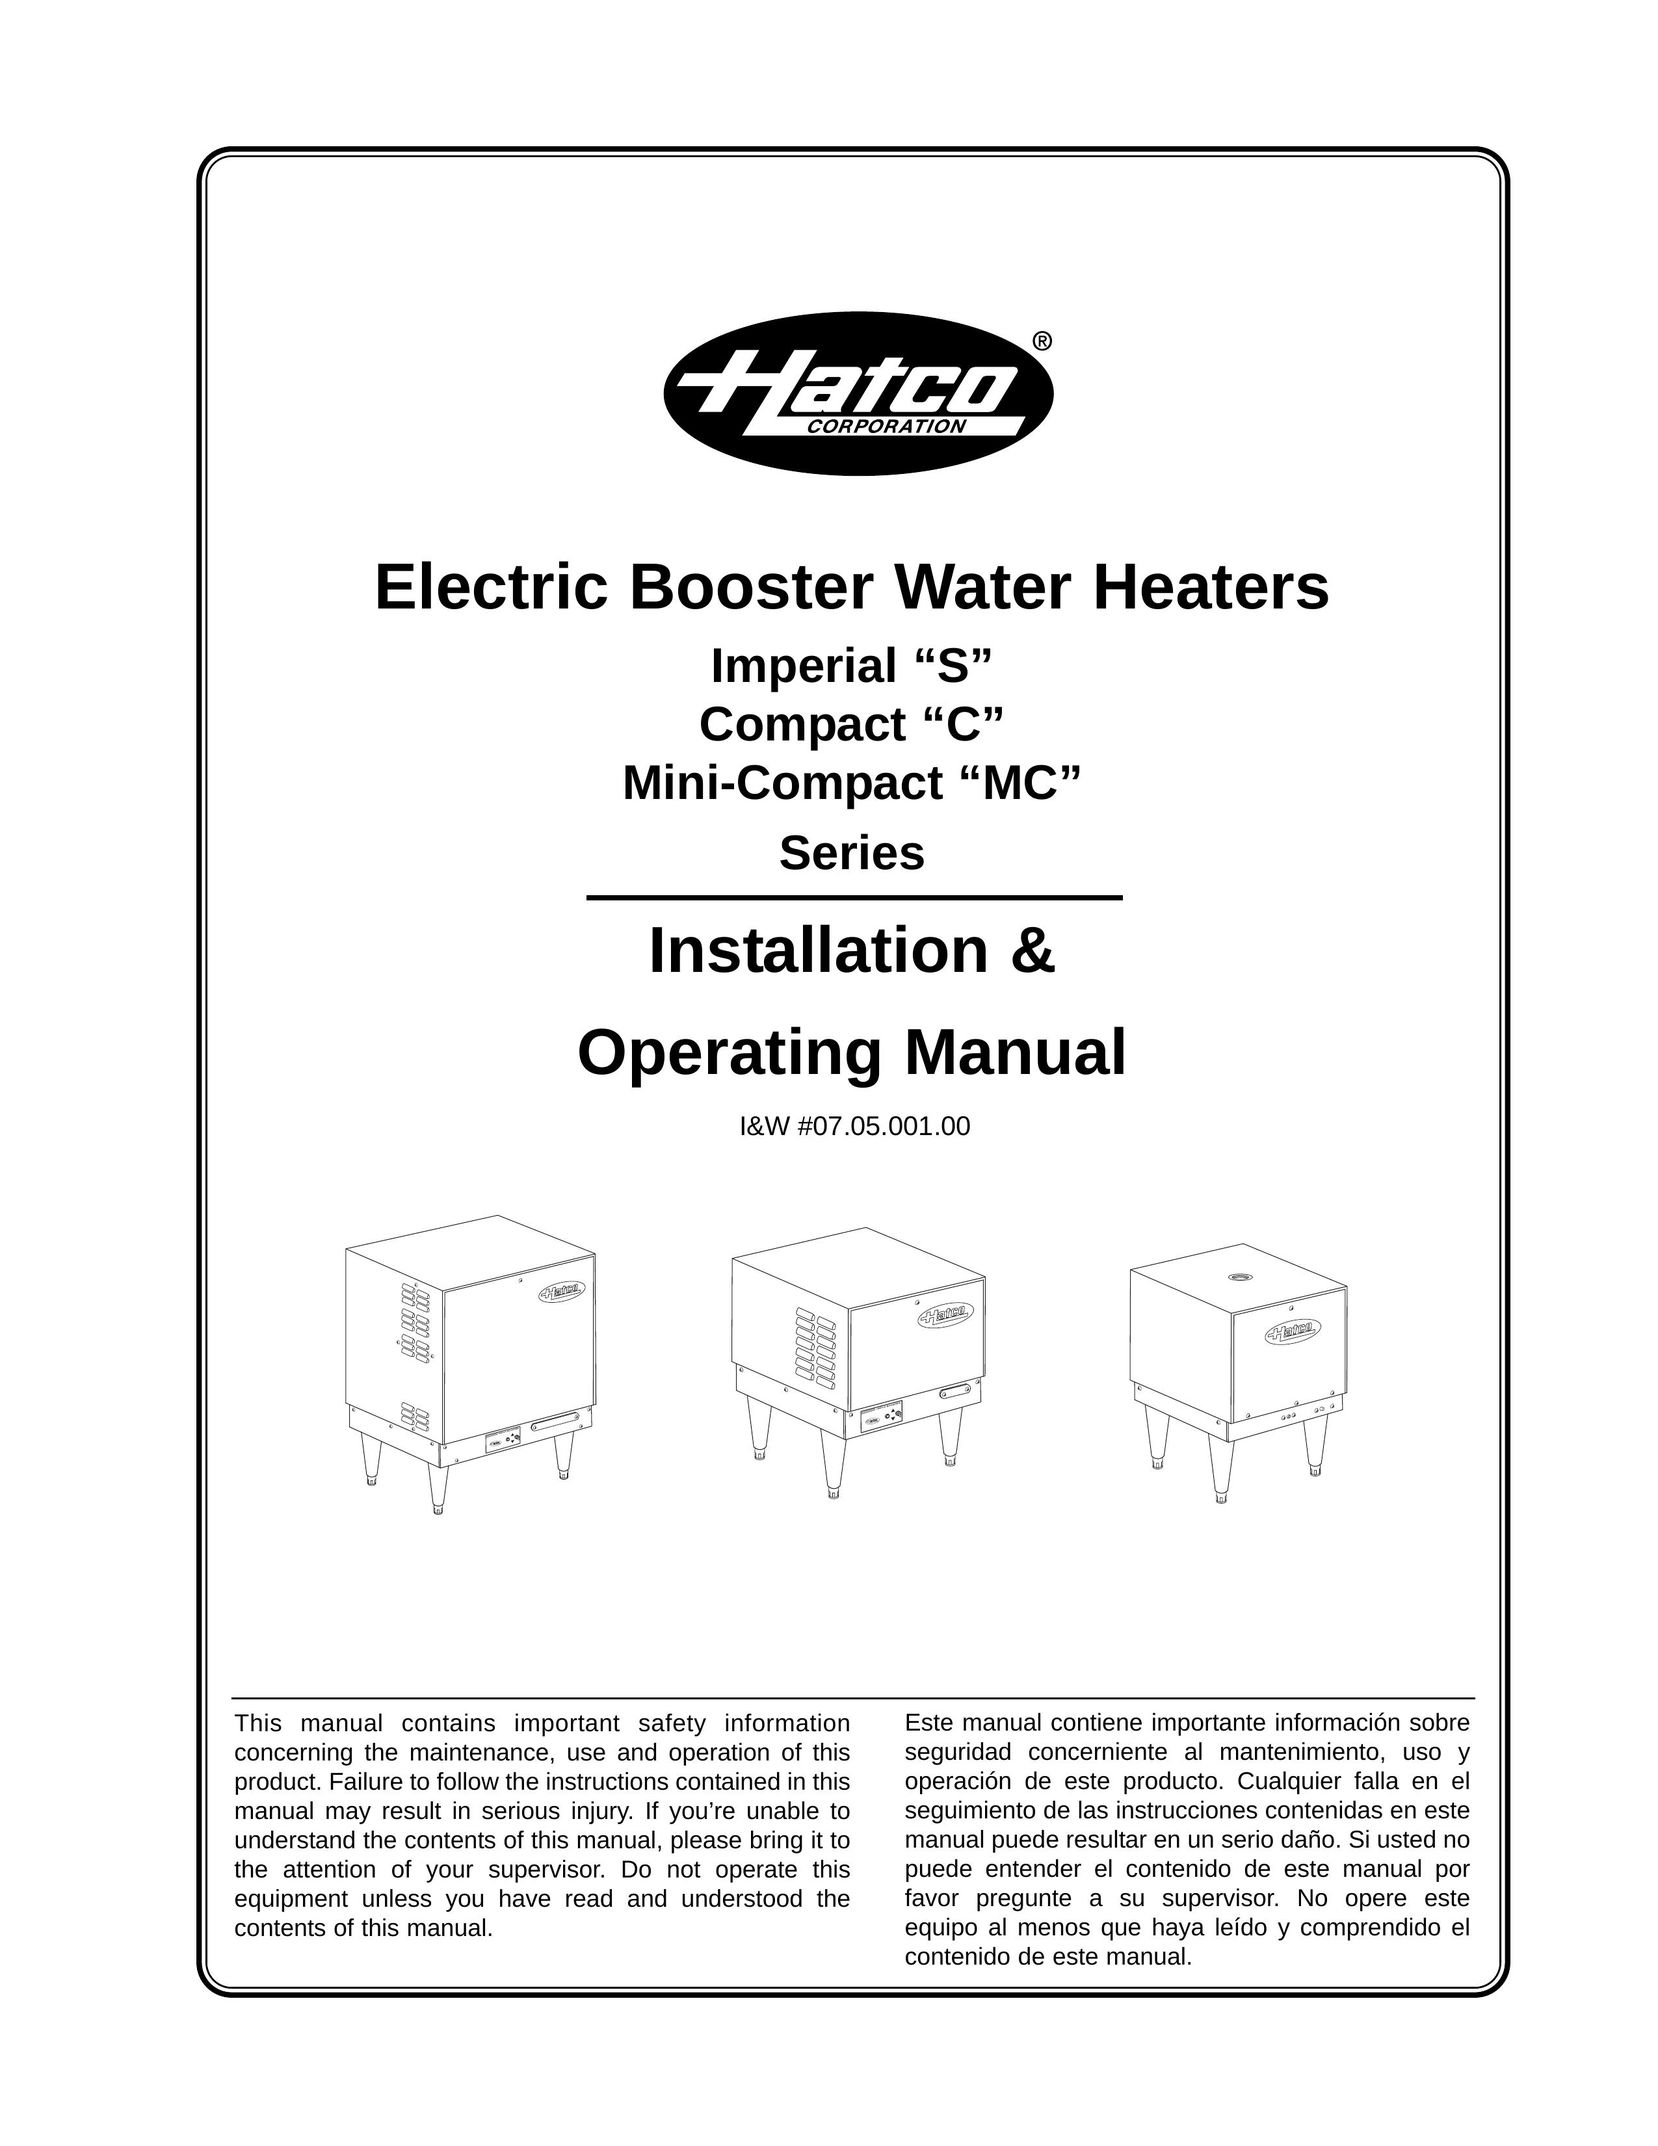 Hatco IMPERIAL "S" Water Heater User Manual